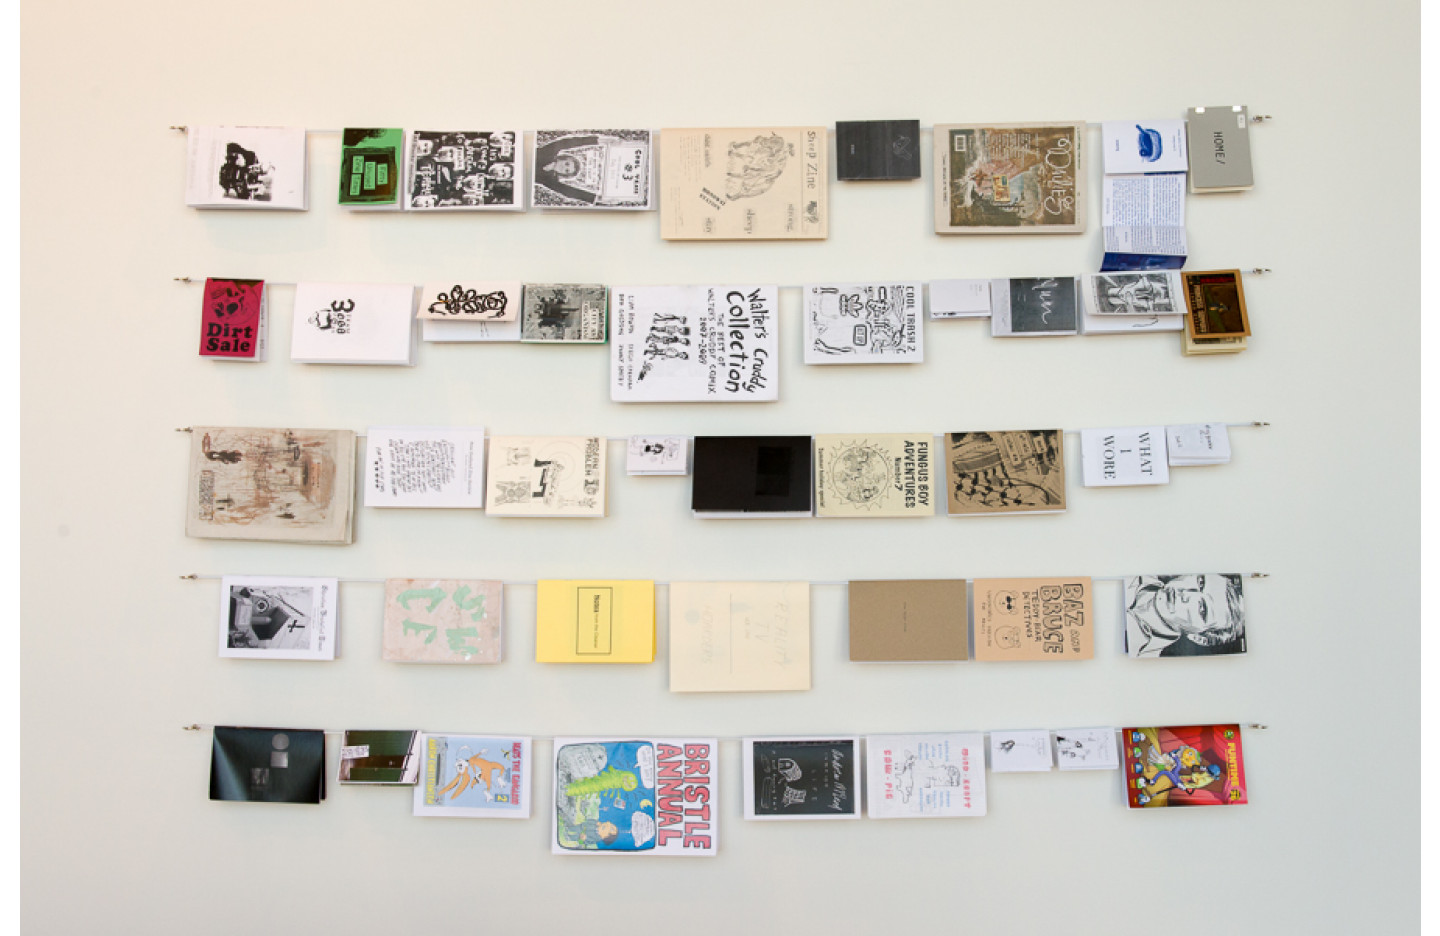 Installation image for 'Small Press', Ramp Gallery May 2014. Curated by Kim Paton & Bryce Galloway